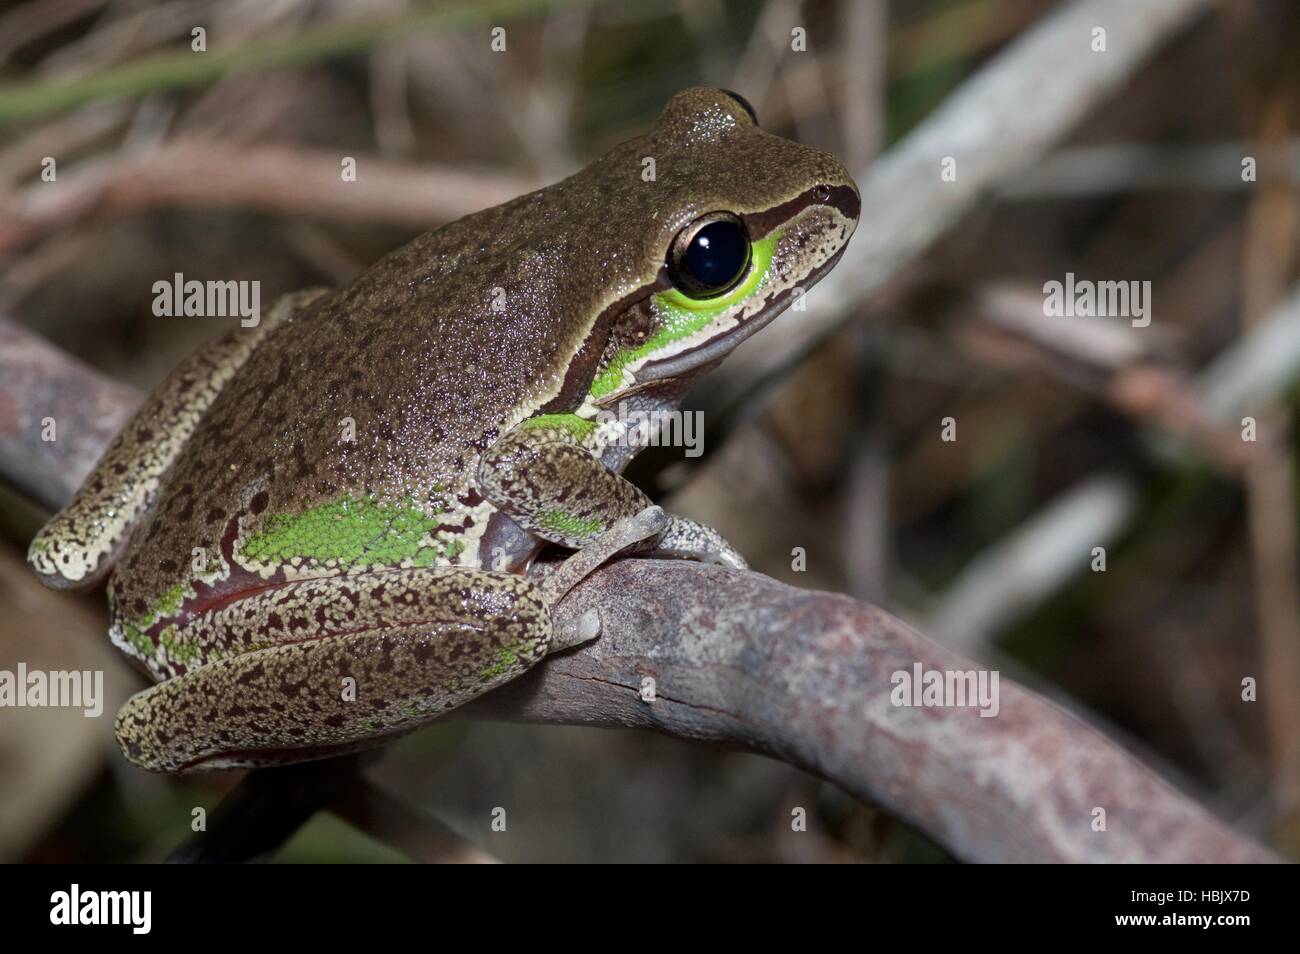 A Blue Mountains Tree Frog (Litoria citropa) at Dharawal National Park, New South Wales, Australia Stock Photo